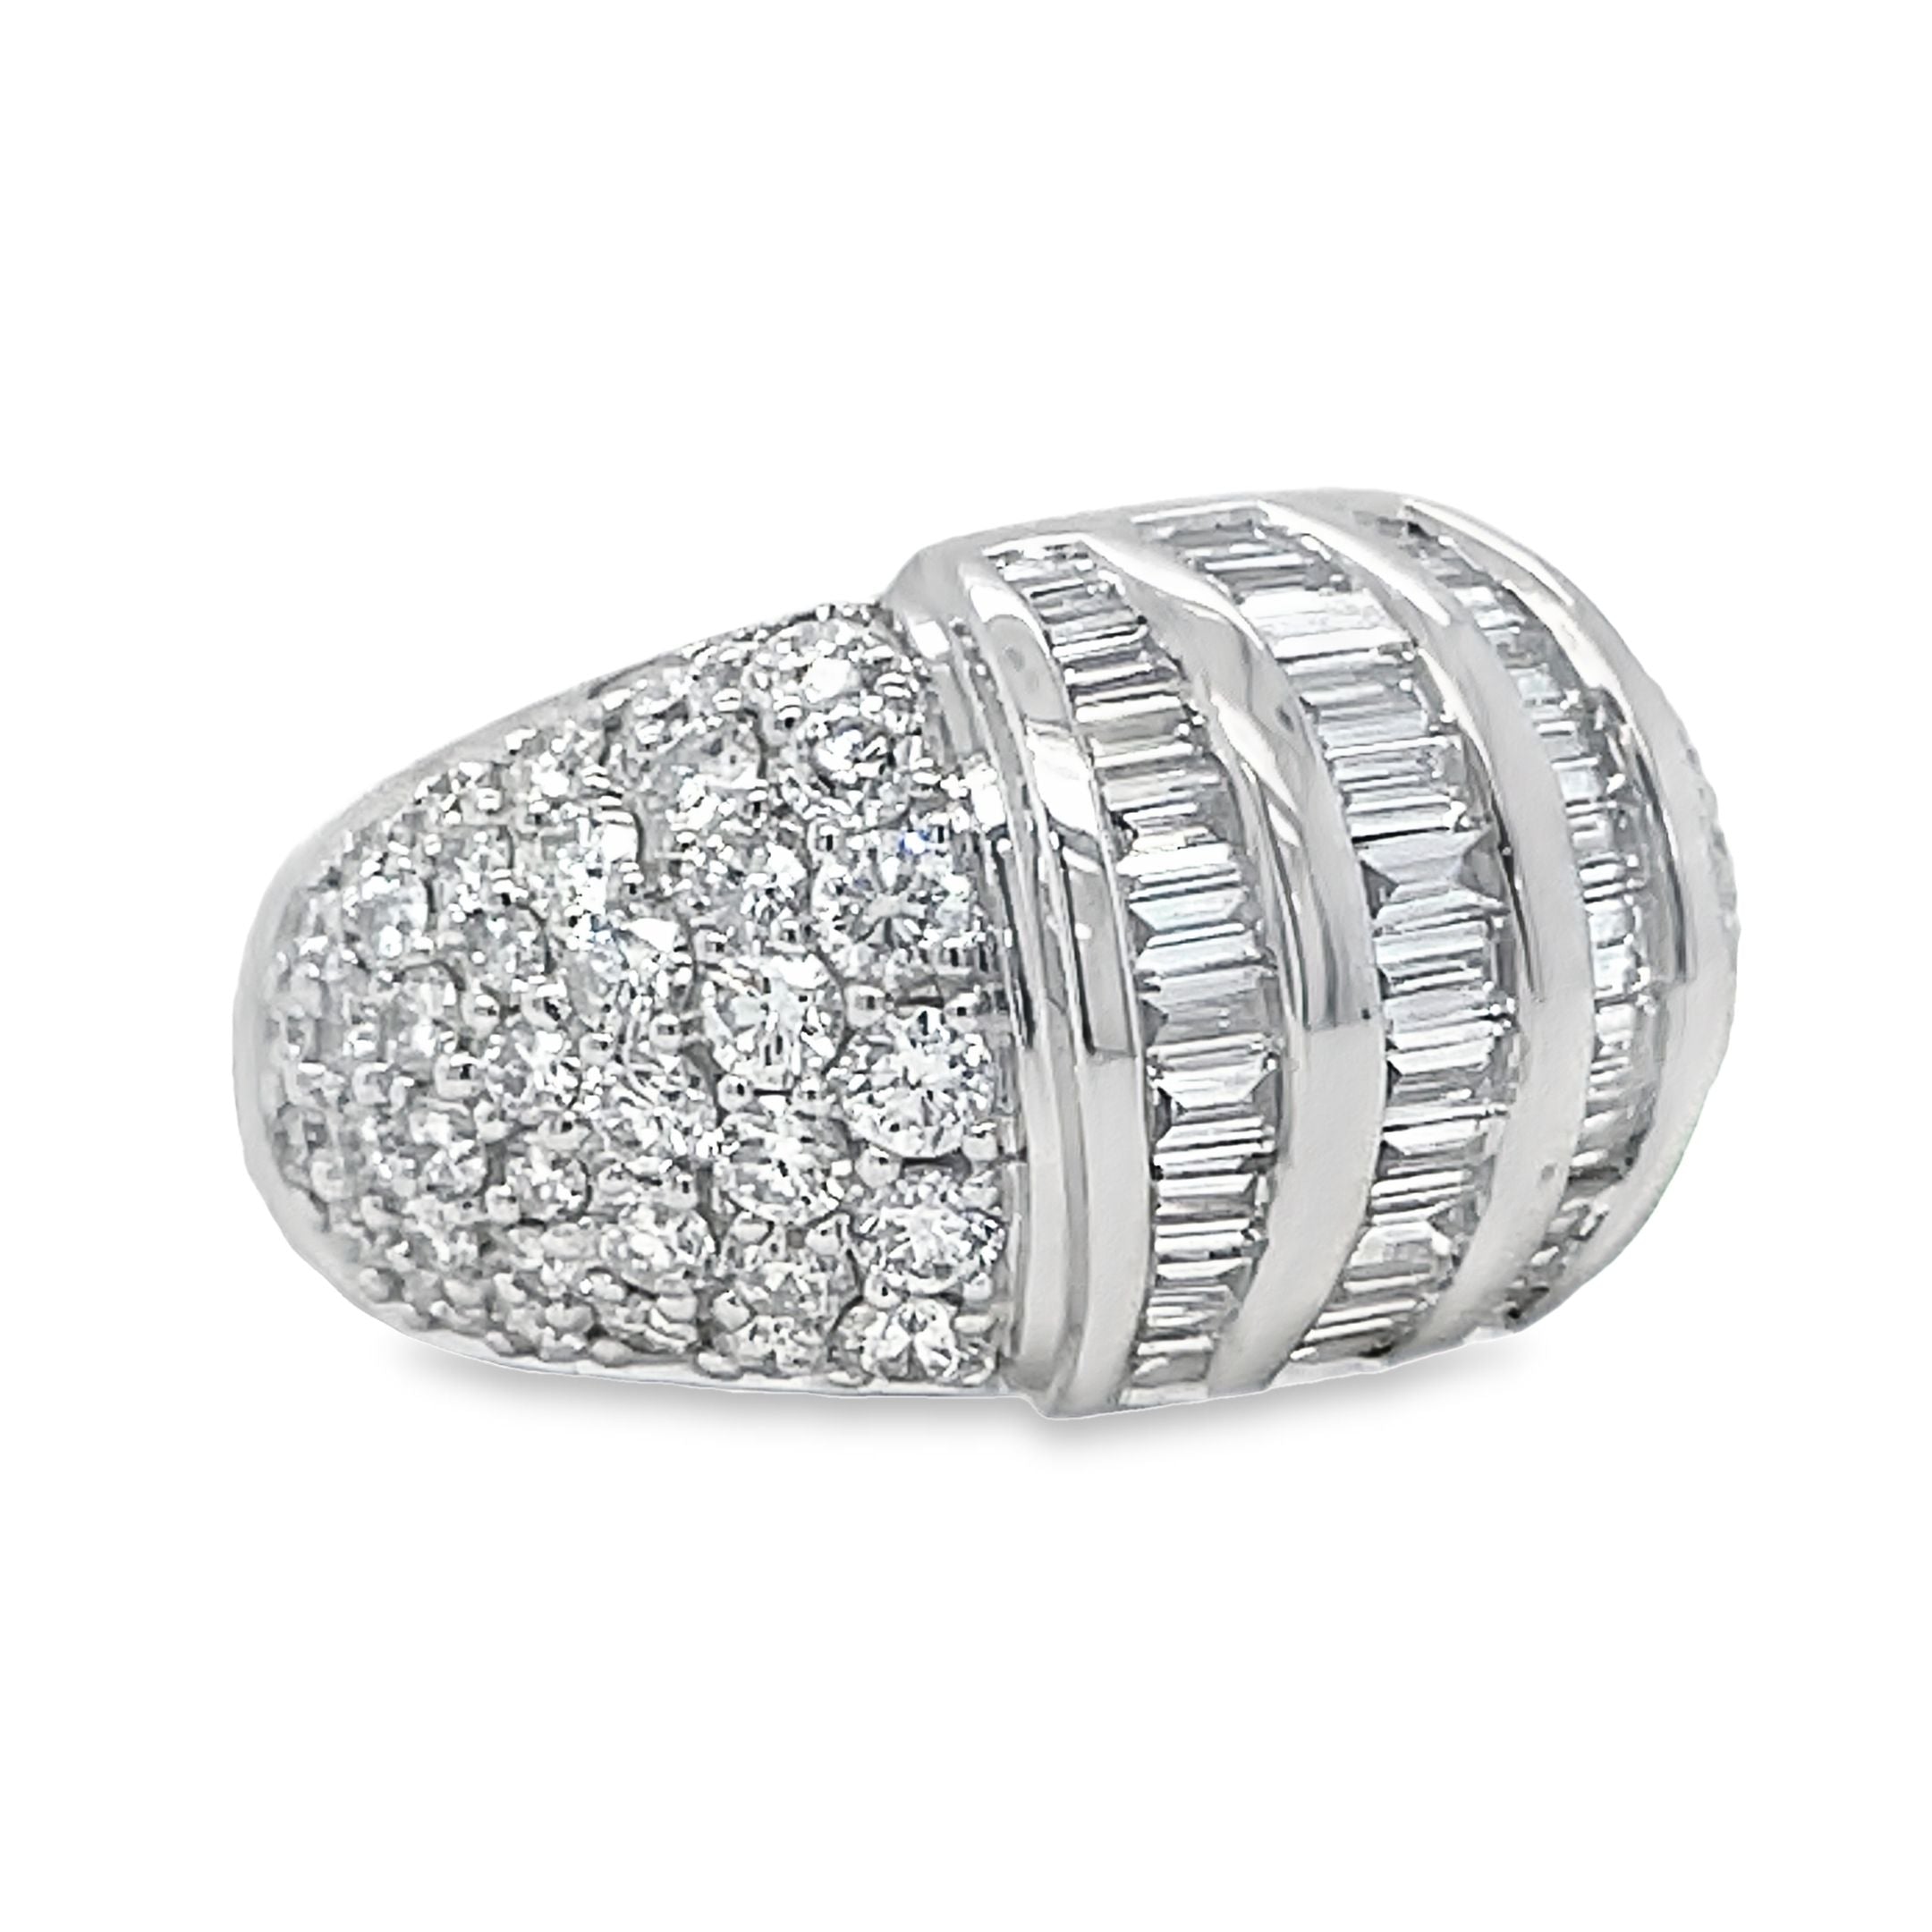 This stunning ring features a combination of round and baguette diamonds totaling 3.20 carats, set in 18k white gold. With a width of 13.00 mm, this ring is sure to make a bold statement. Perfect for those who appreciate classic design and luxurious materials.